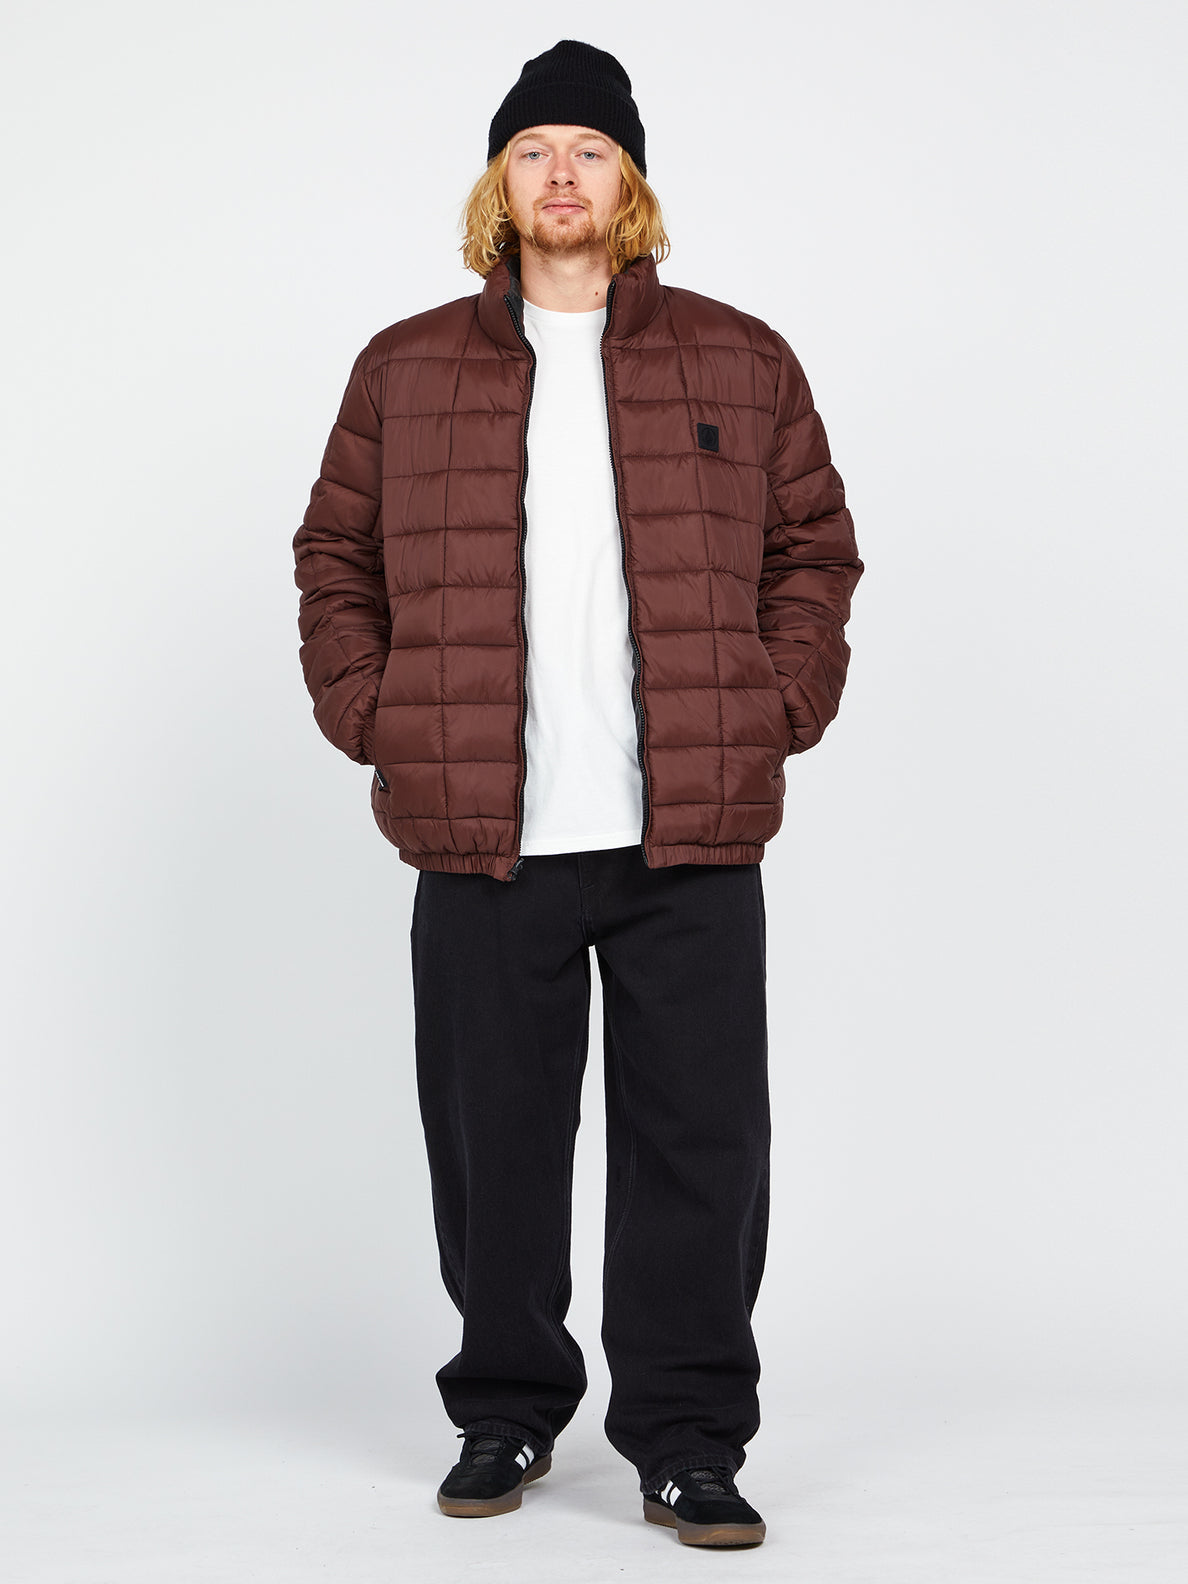 The Very Warm Puffer Jacket Camo Polyfilled - KCDC Skateshop